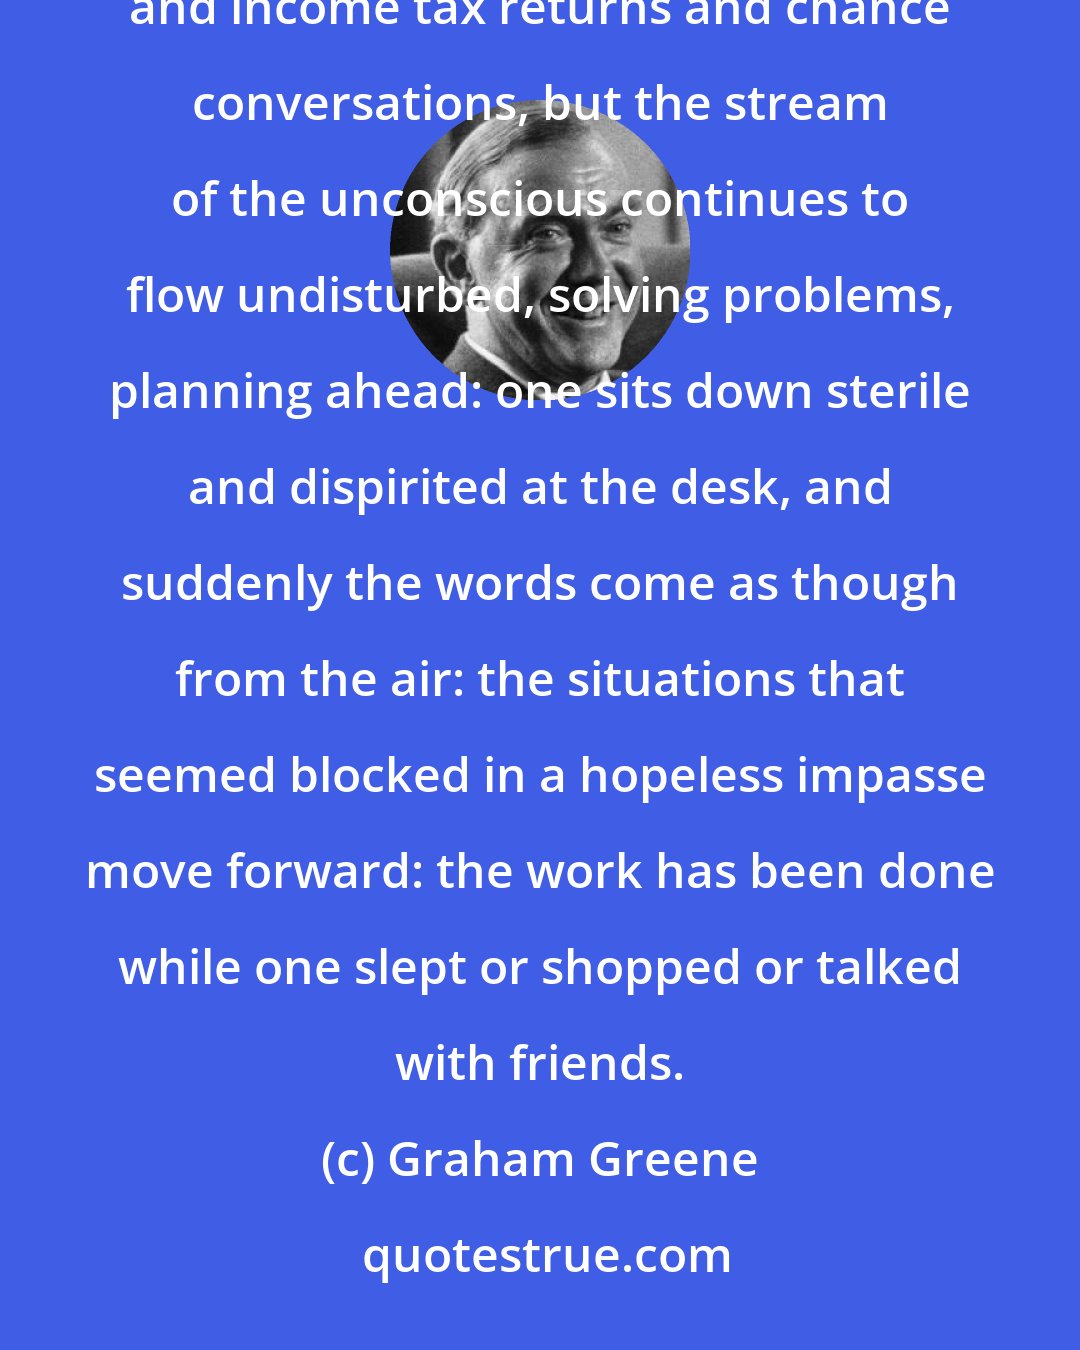 Graham Greene: So much in writing depends on the superficiality of one's days. One may be preoccupied with shopping and income tax returns and chance conversations, but the stream of the unconscious continues to flow undisturbed, solving problems, planning ahead: one sits down sterile and dispirited at the desk, and suddenly the words come as though from the air: the situations that seemed blocked in a hopeless impasse move forward: the work has been done while one slept or shopped or talked with friends.